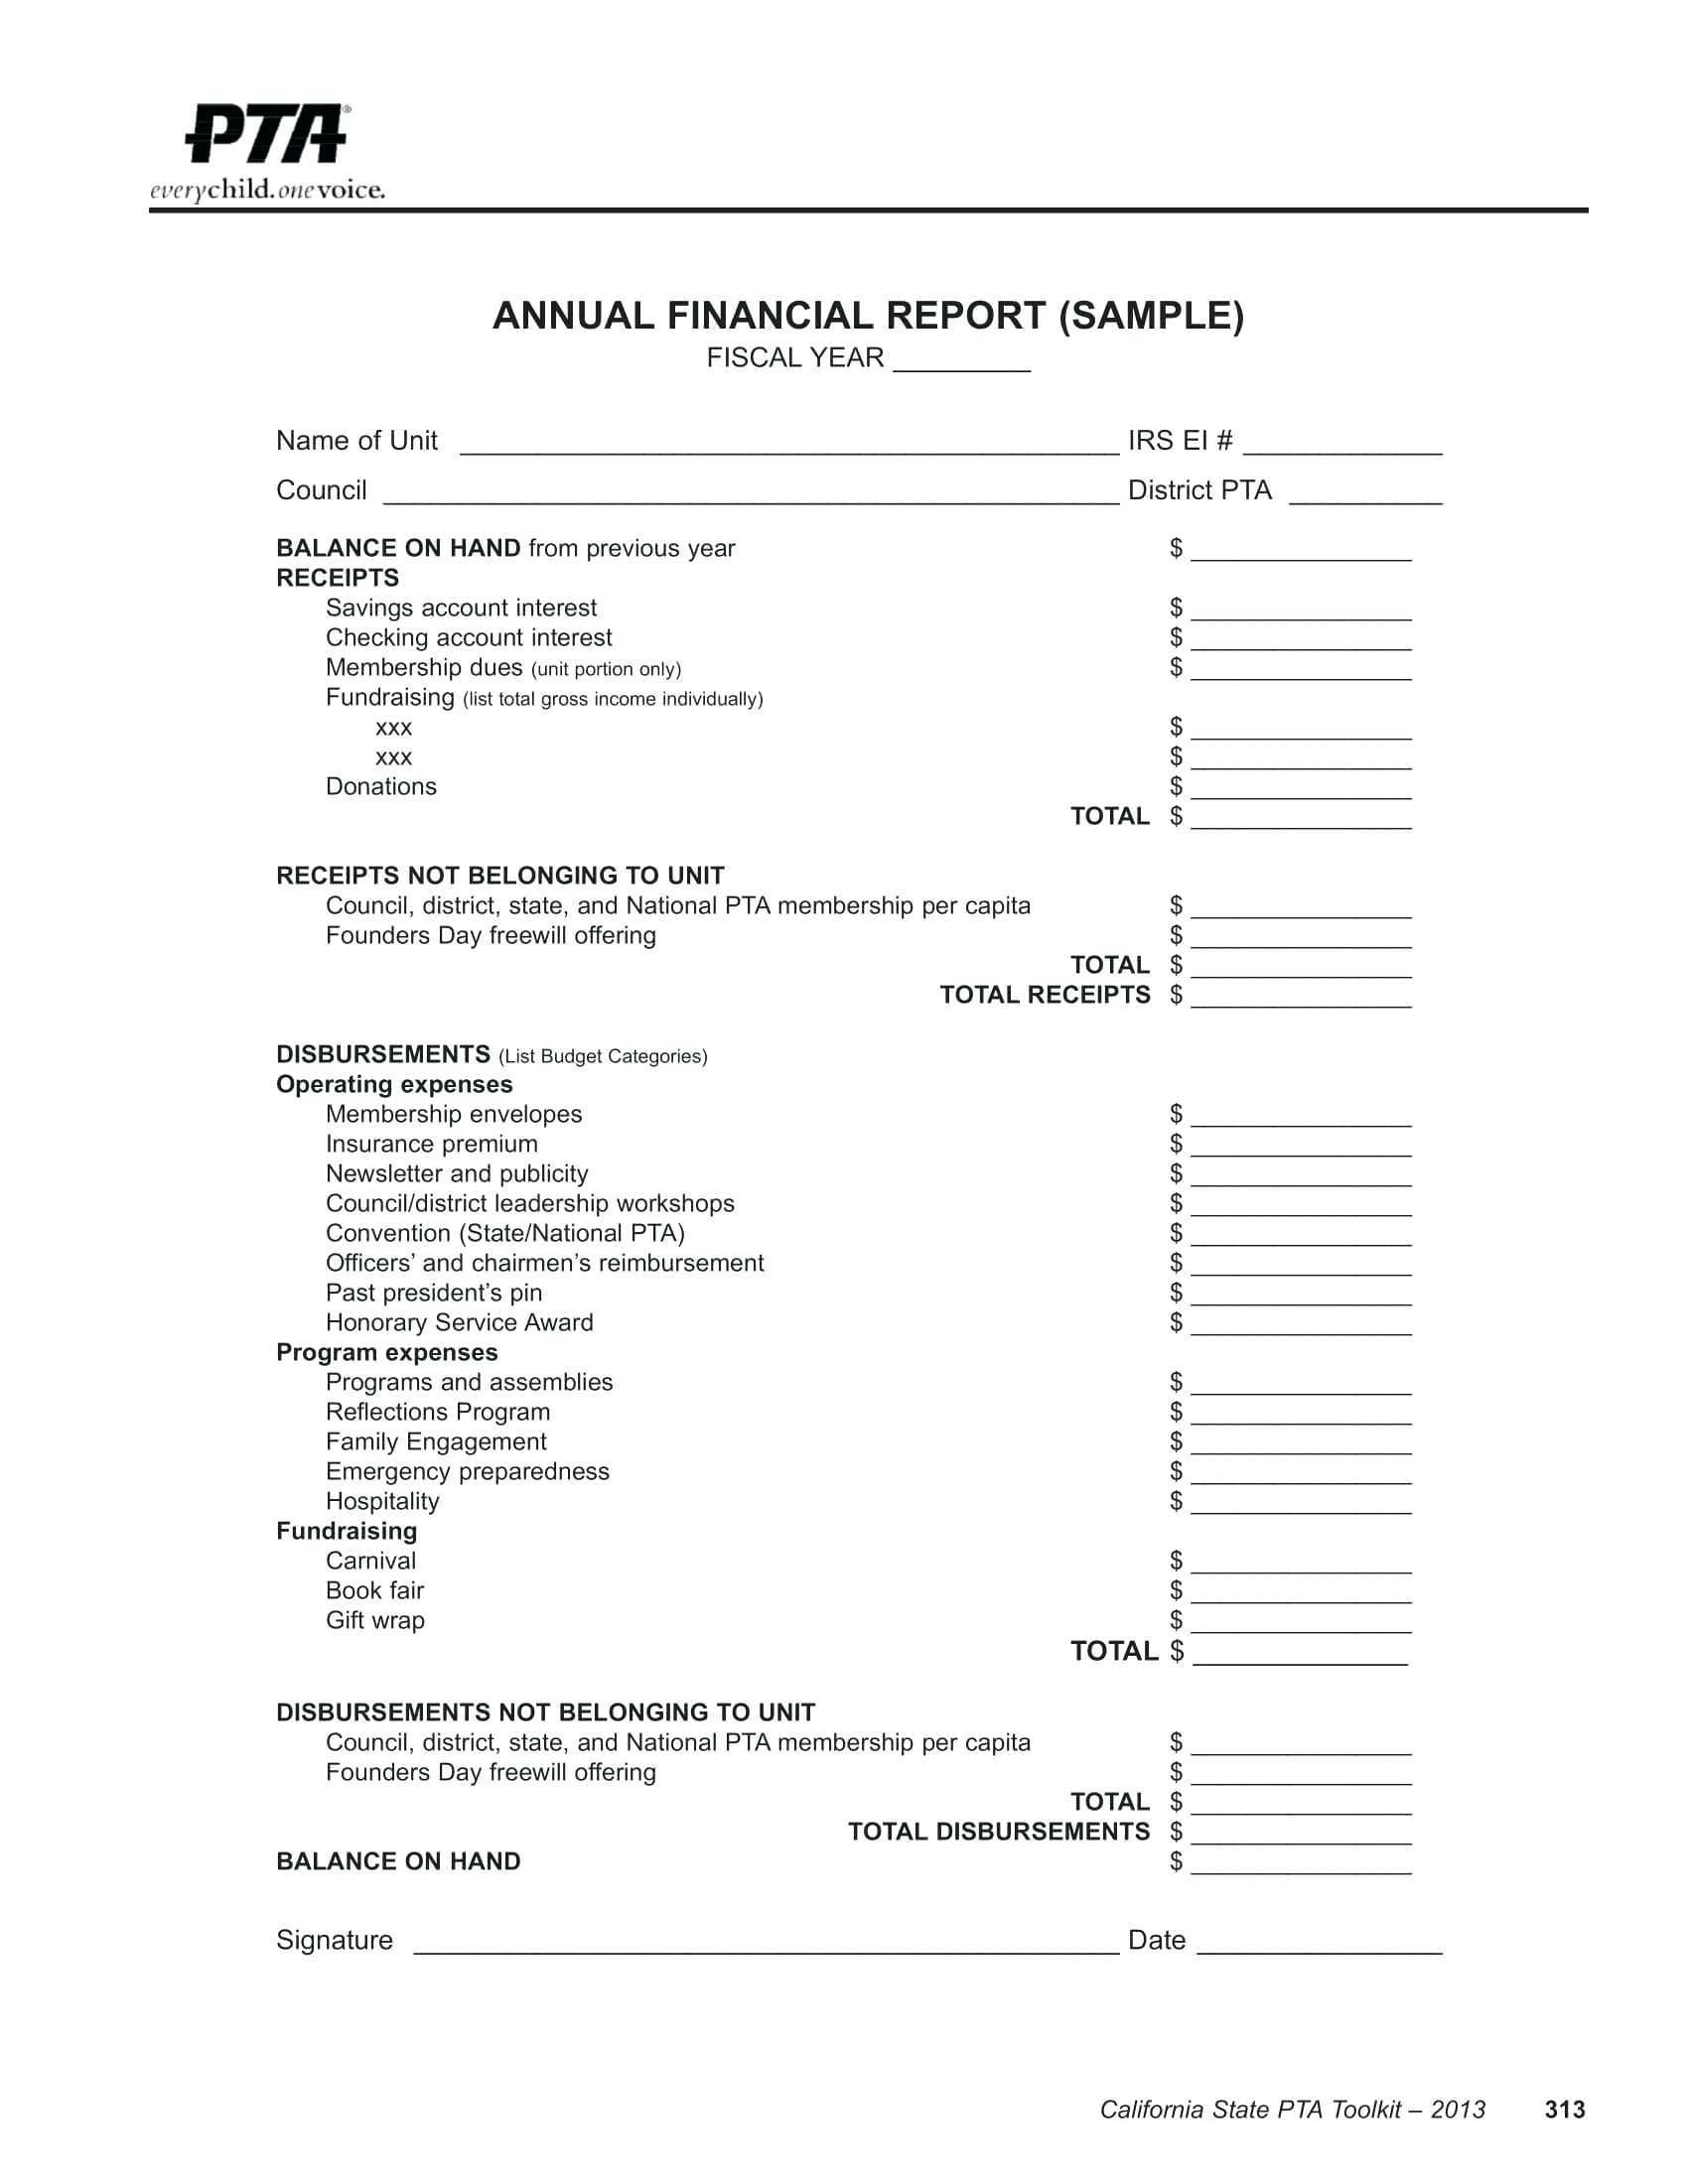 Sample Financial Reports Analysis Report Plate Statements For Annual Financial Report Template Word